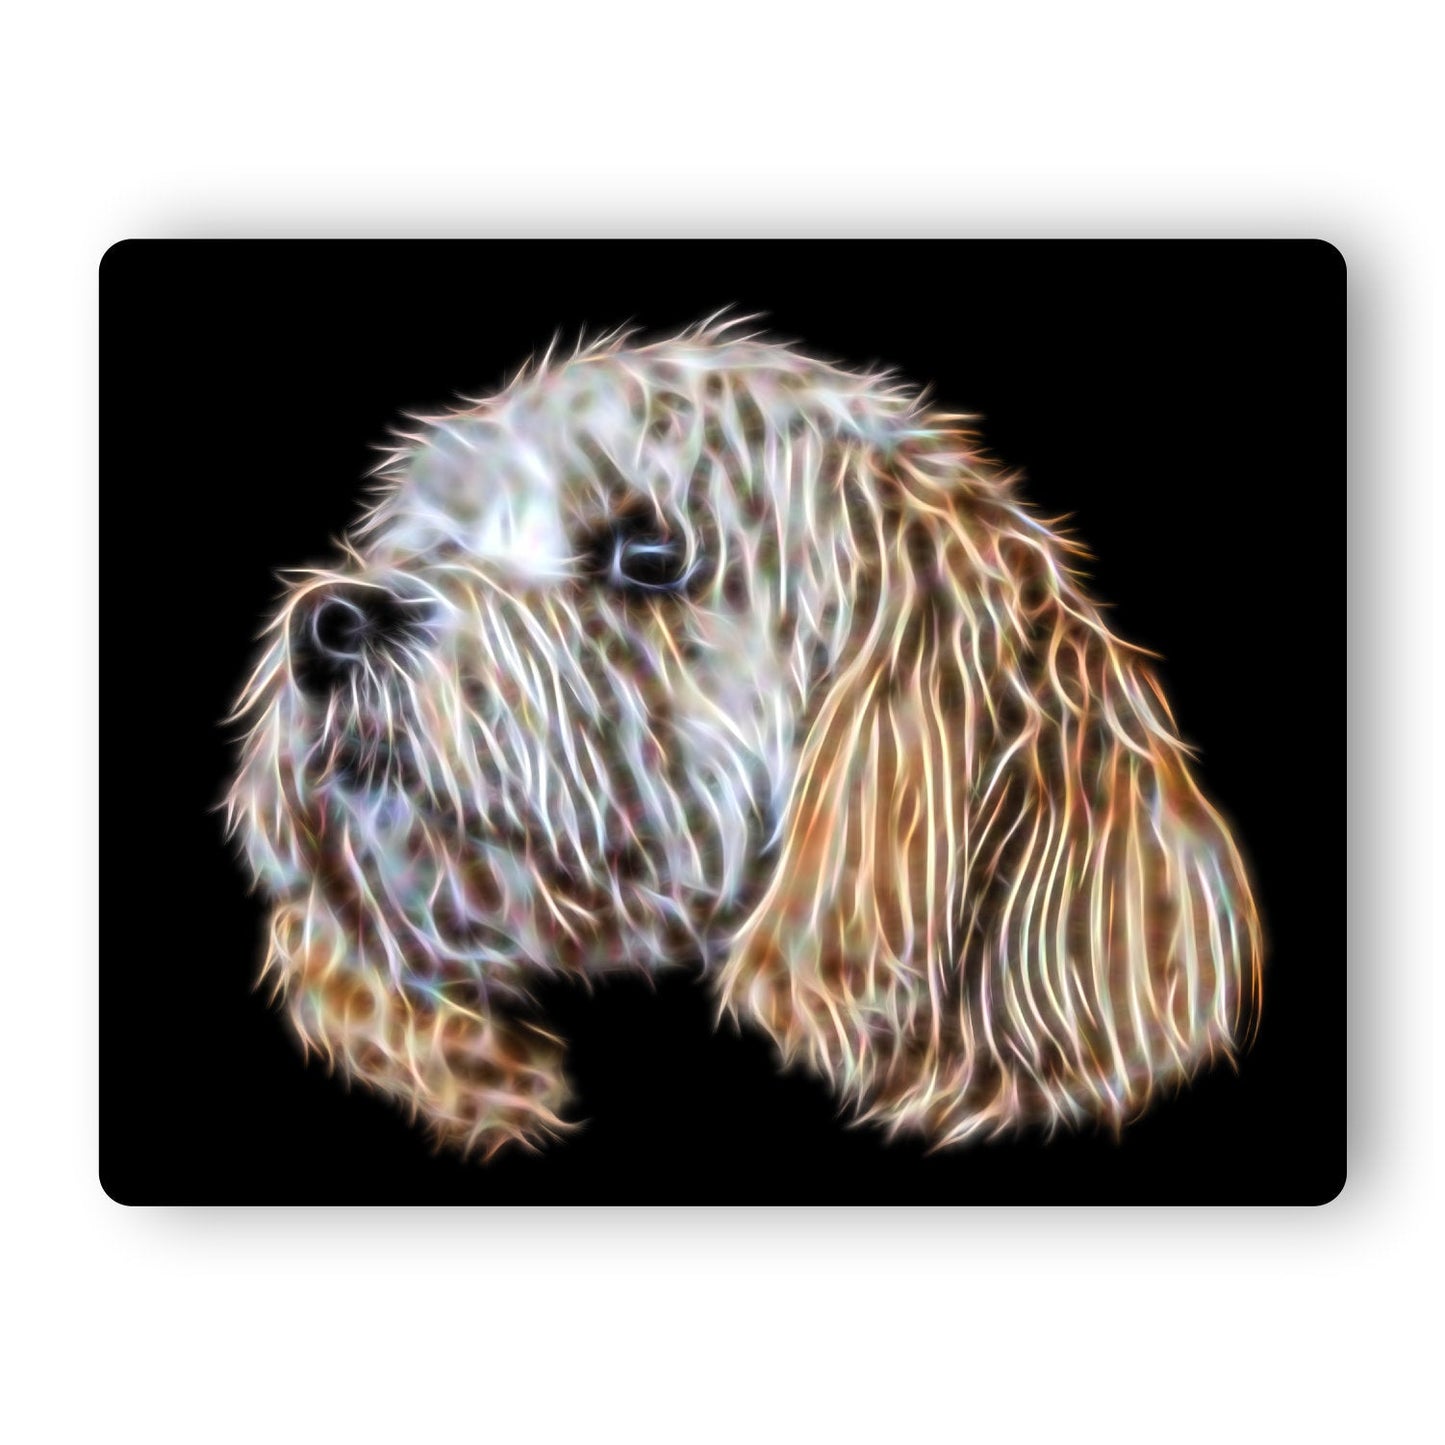 Cavachon Dog Metal Wall Plaque,  Perfect Cavachon Owner or Dog Lover Gift.